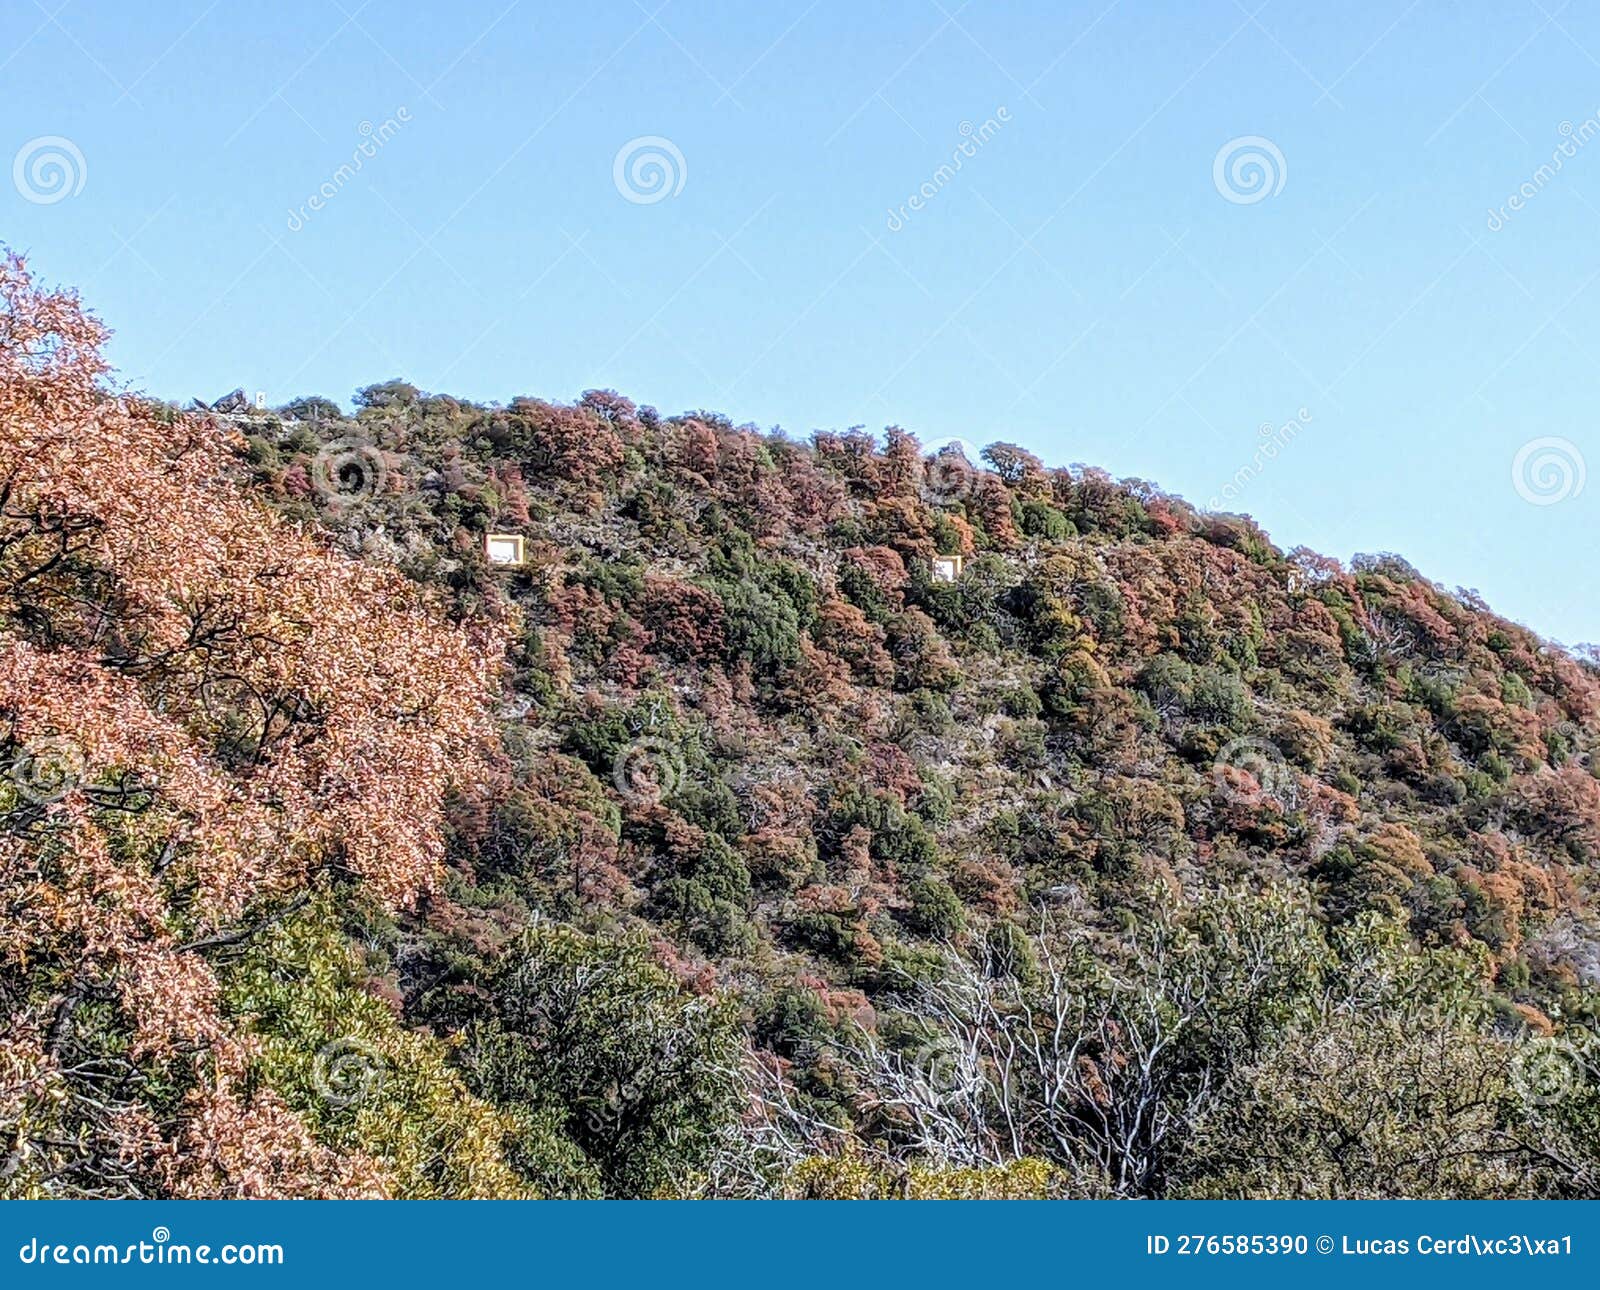 mountain slope with mix of red, yellow, and green trees in cÃ³rdoba, argentina